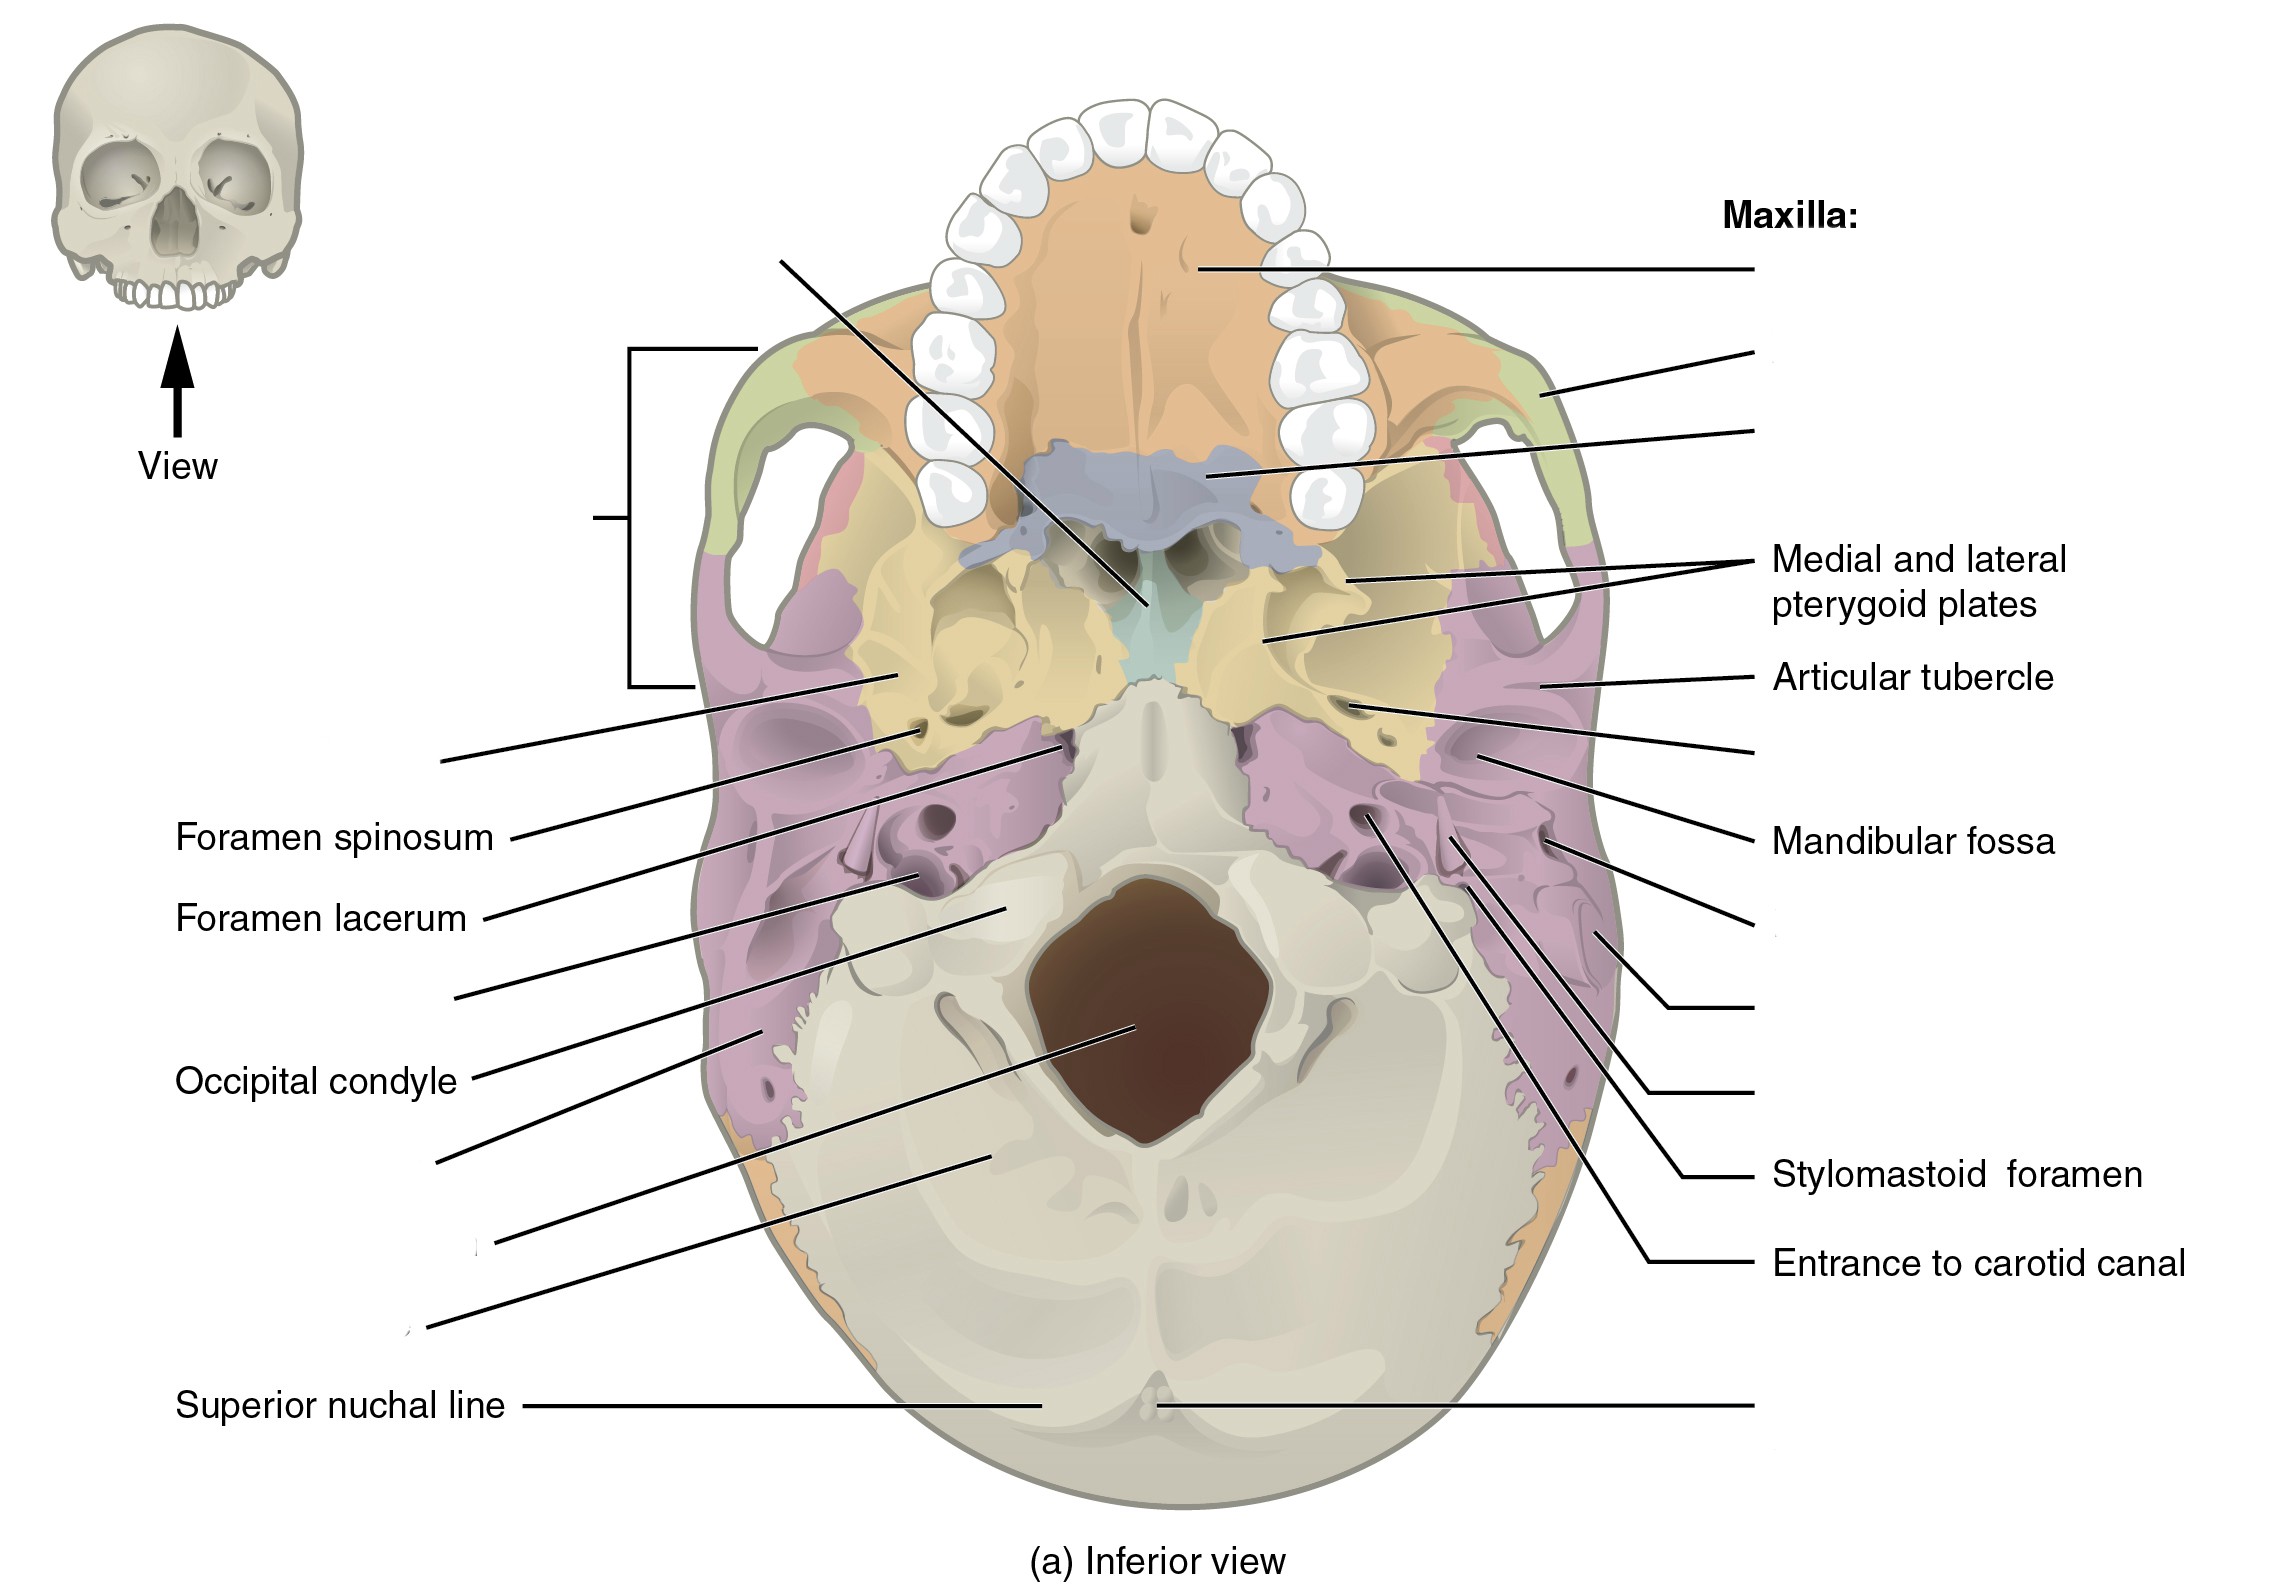 The hard palate is formed anteriorly by the palatine processes of the maxilla bones and posteriorly by the horizontal plate of the palatine bones.